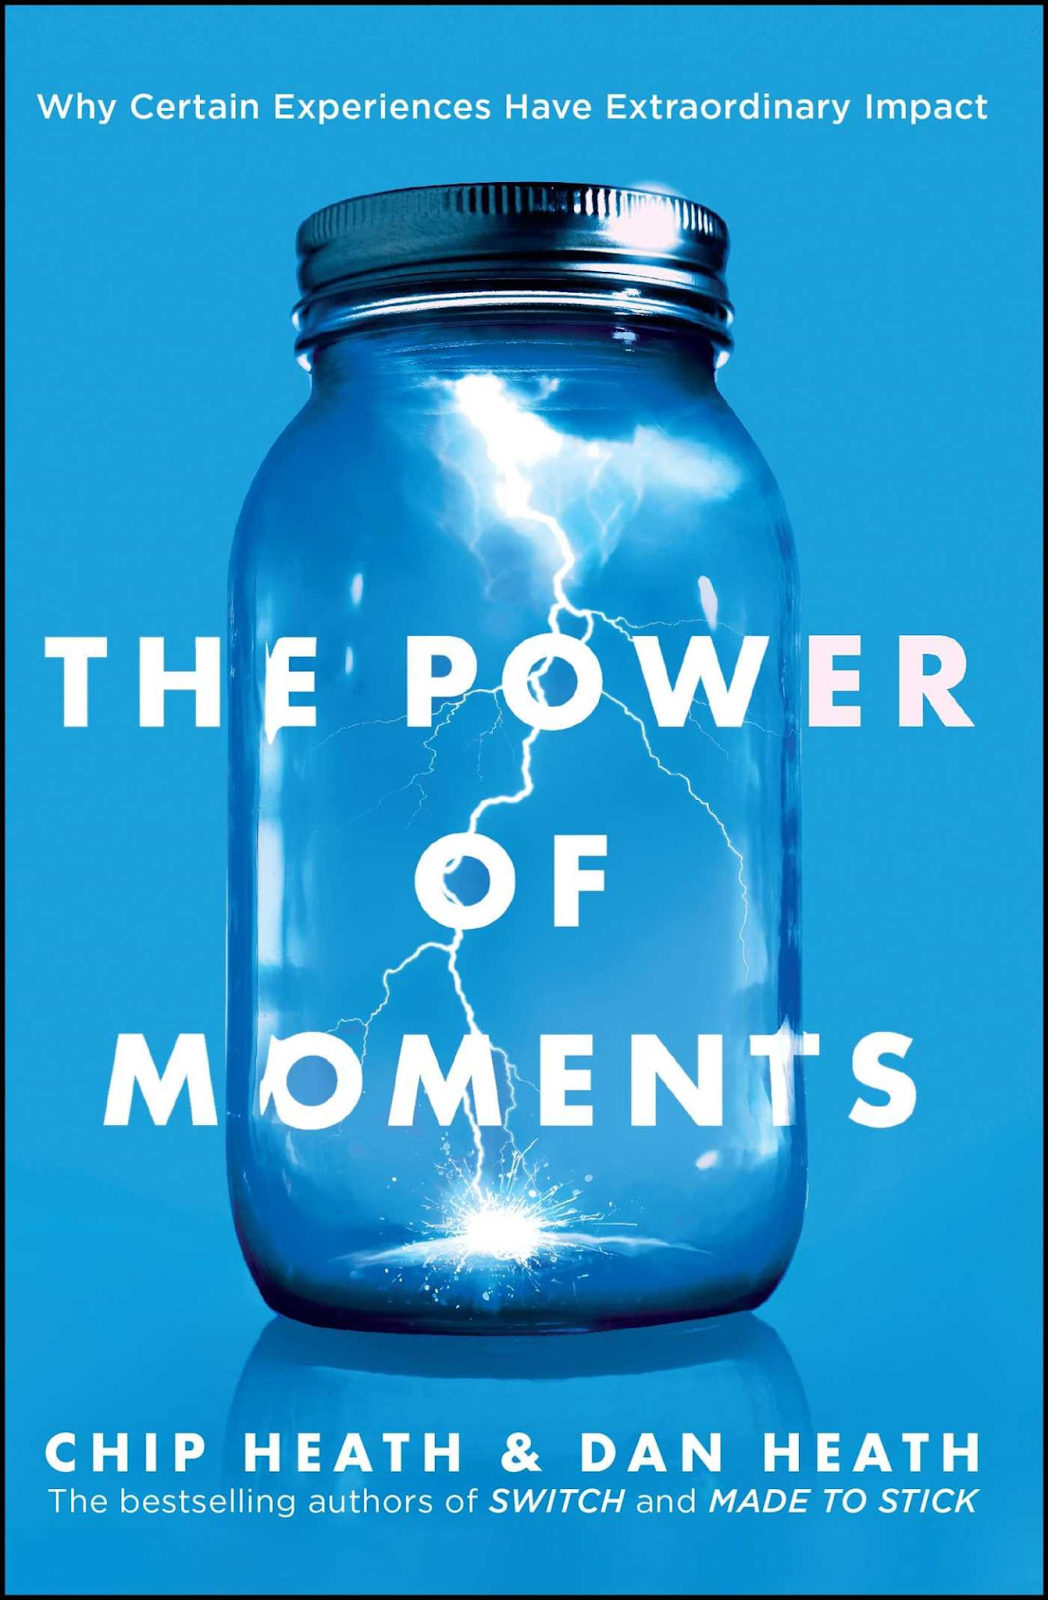 The Power of Moments by Chip Heath and Dan Heath